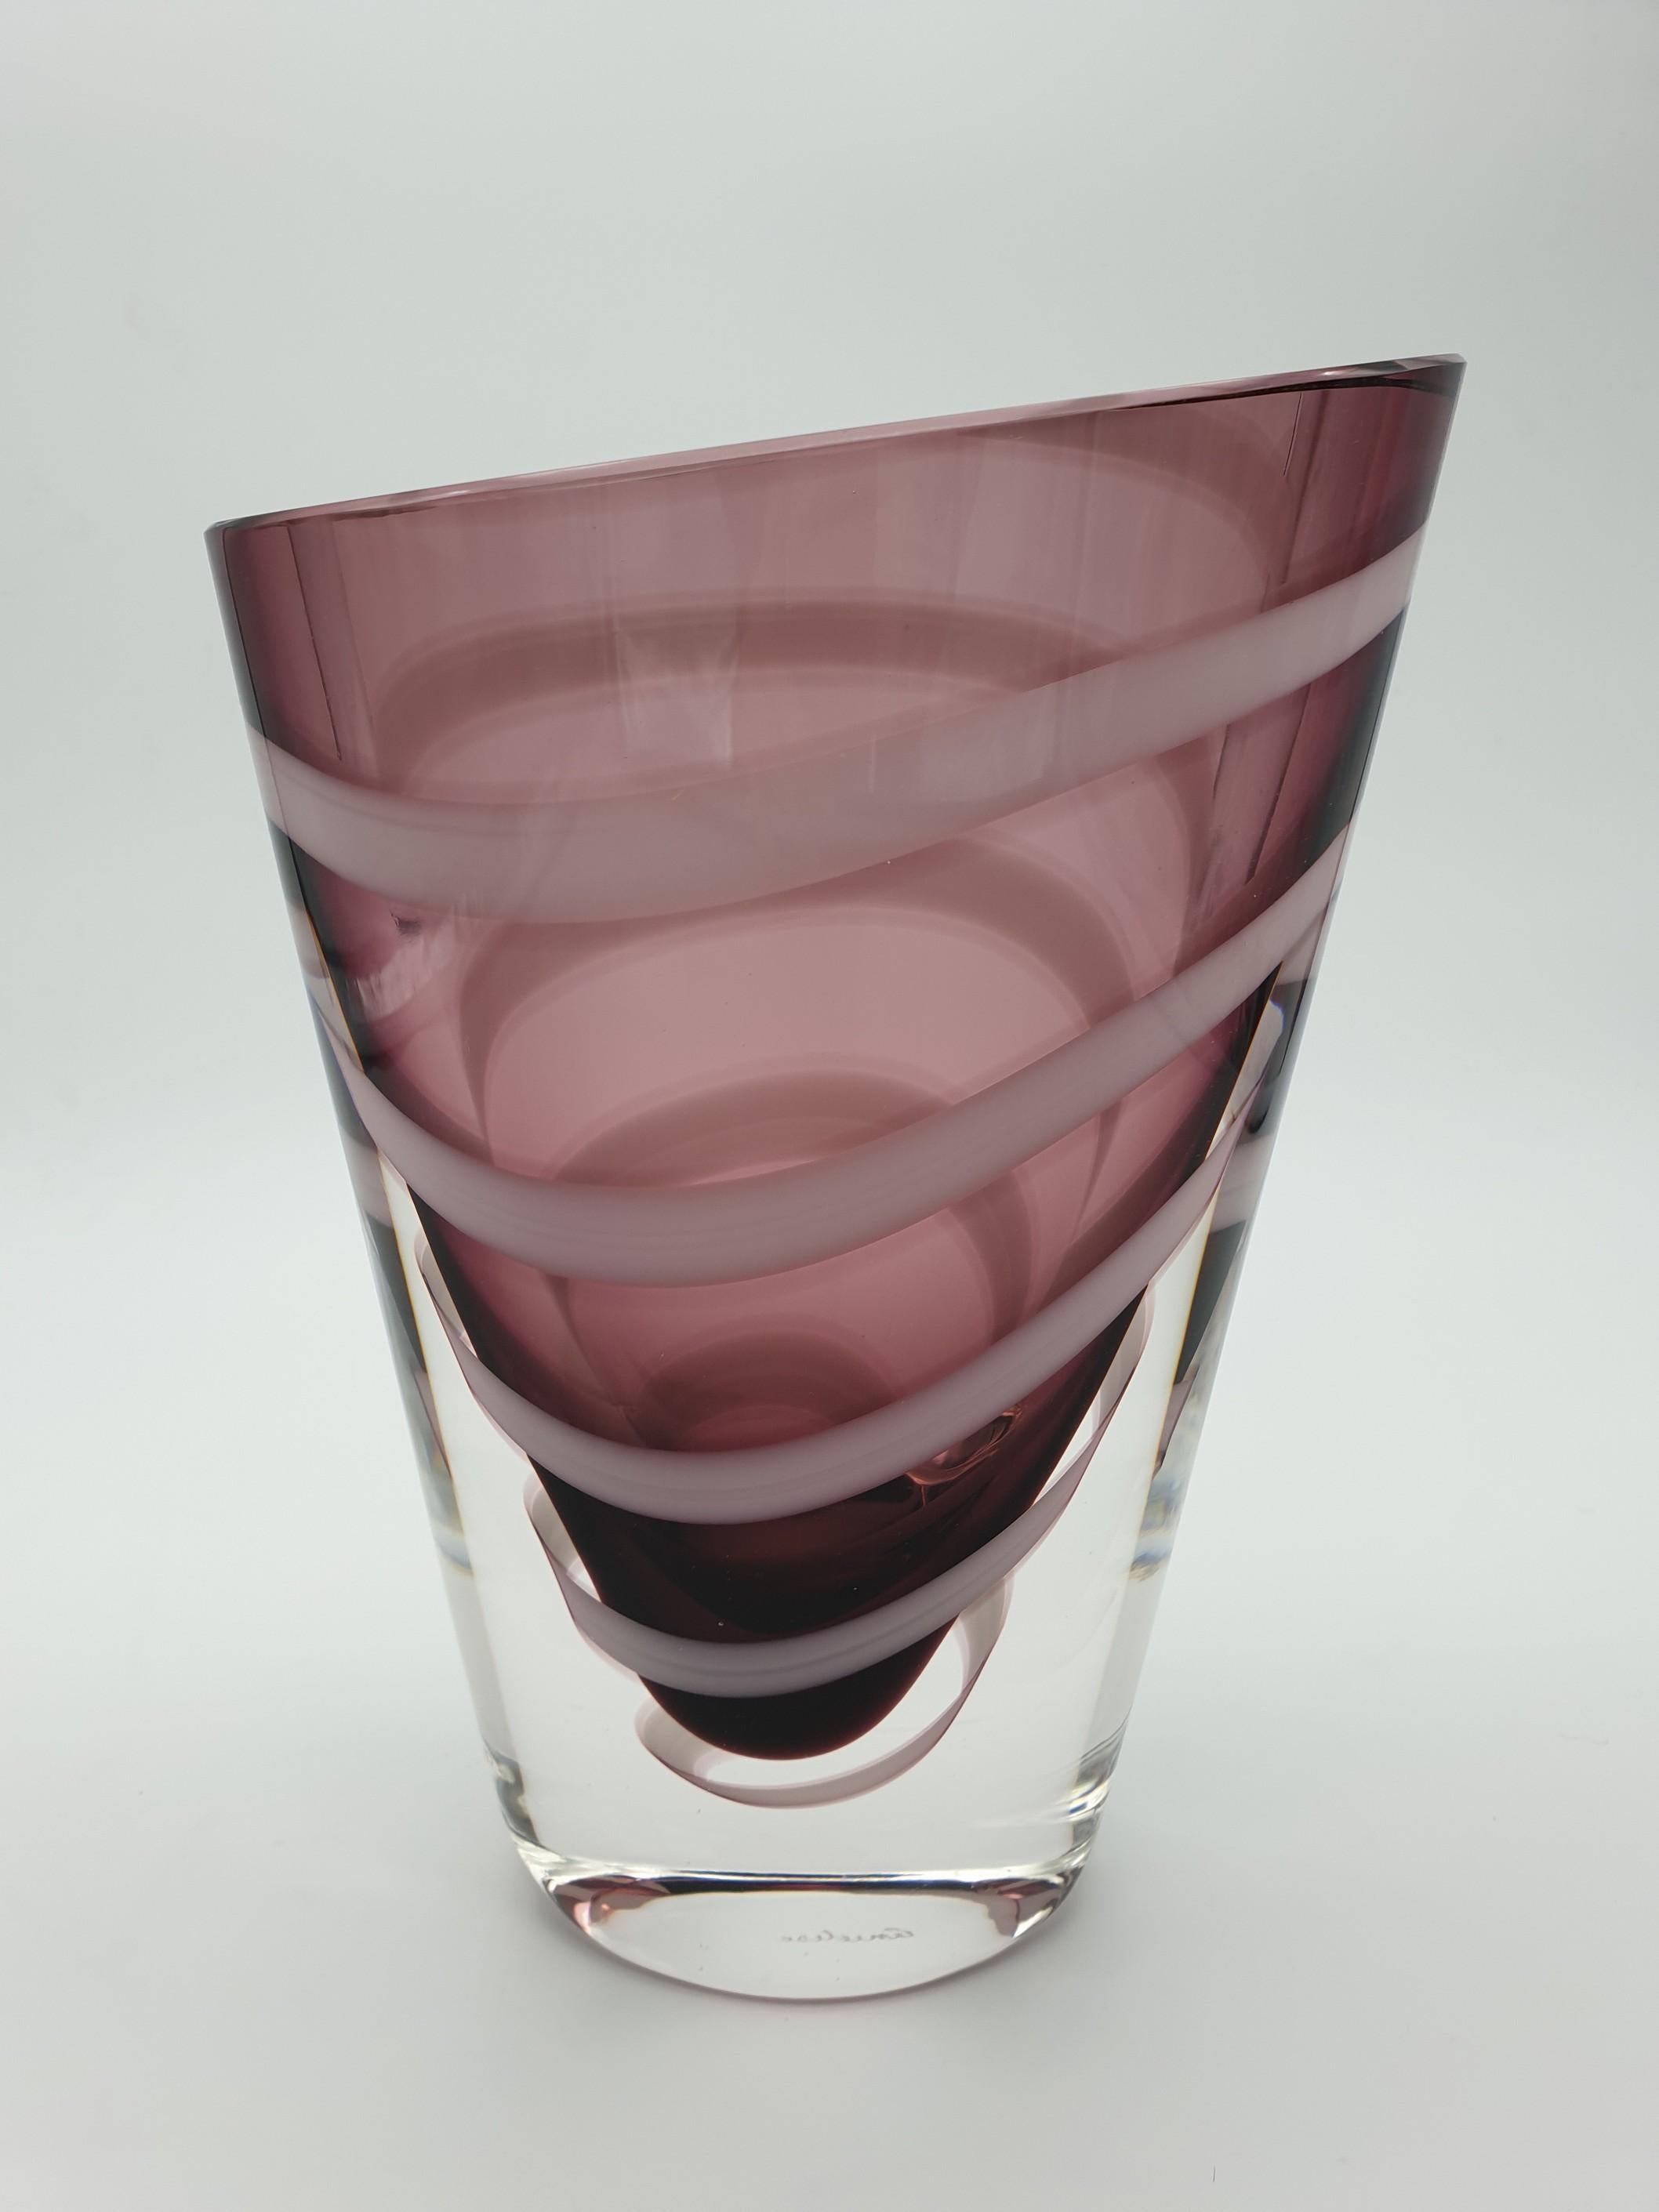 Contemporary Solid Murano Glass Vase by Cenedese, late 1990s For Sale 3